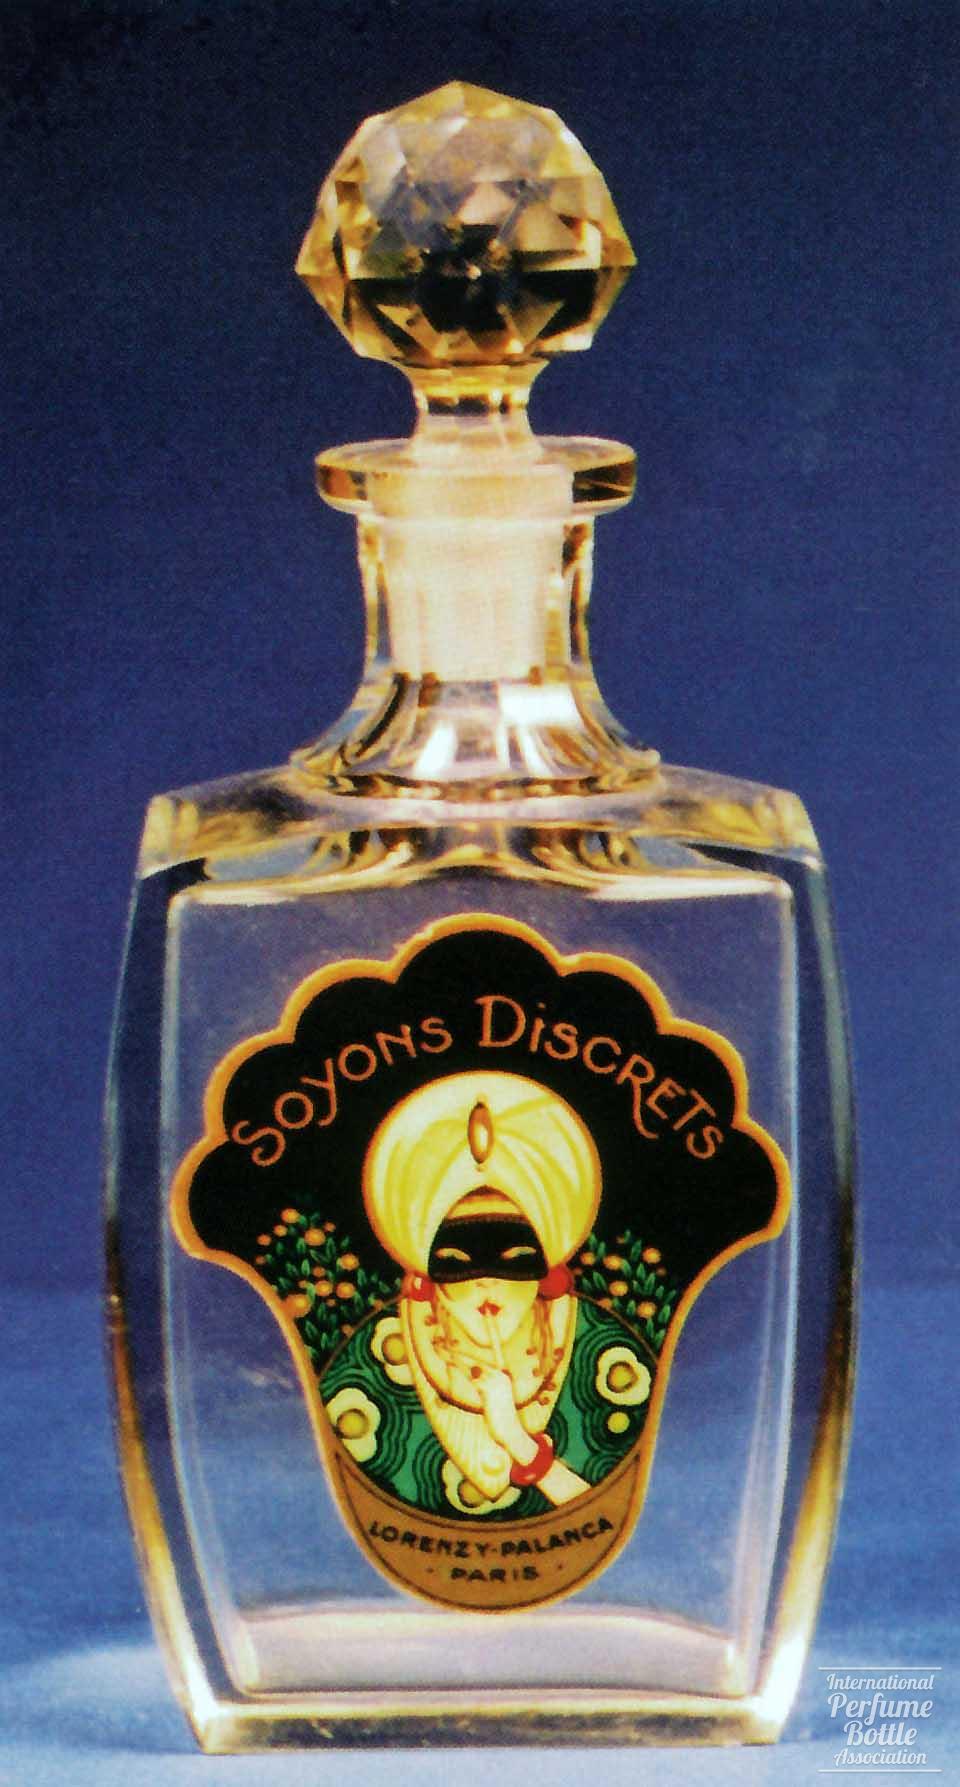 "Soyons Discrets" by Lorenzy-Palanca